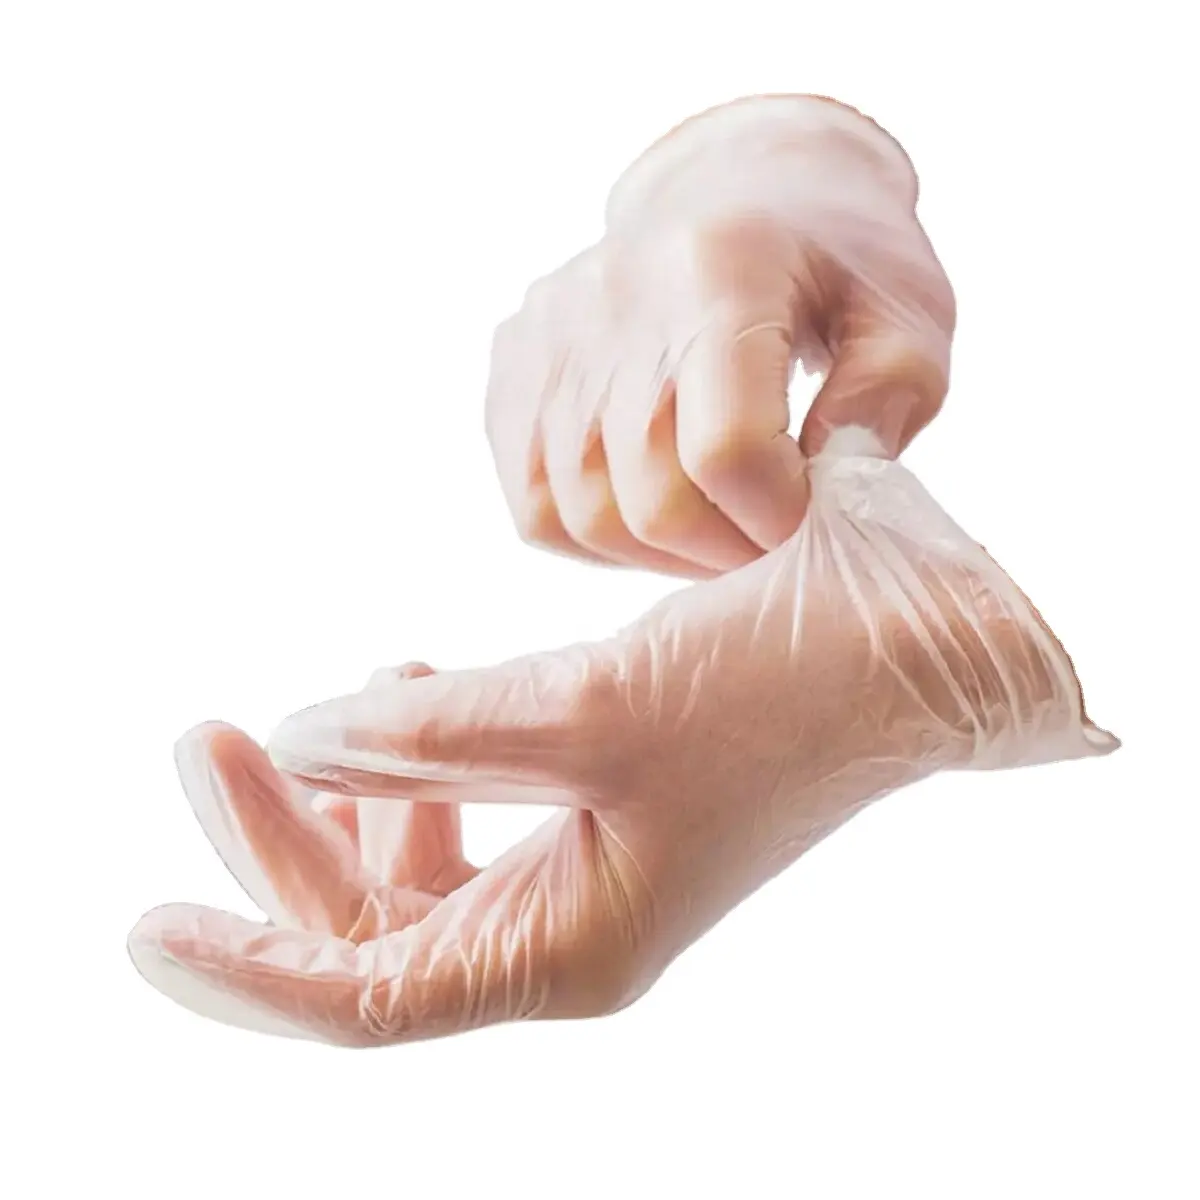 Disposable Vinyl household Glovees/Clear Vinyl Glovees/protective glovees 100 pcs/Box  S/M/L/XL